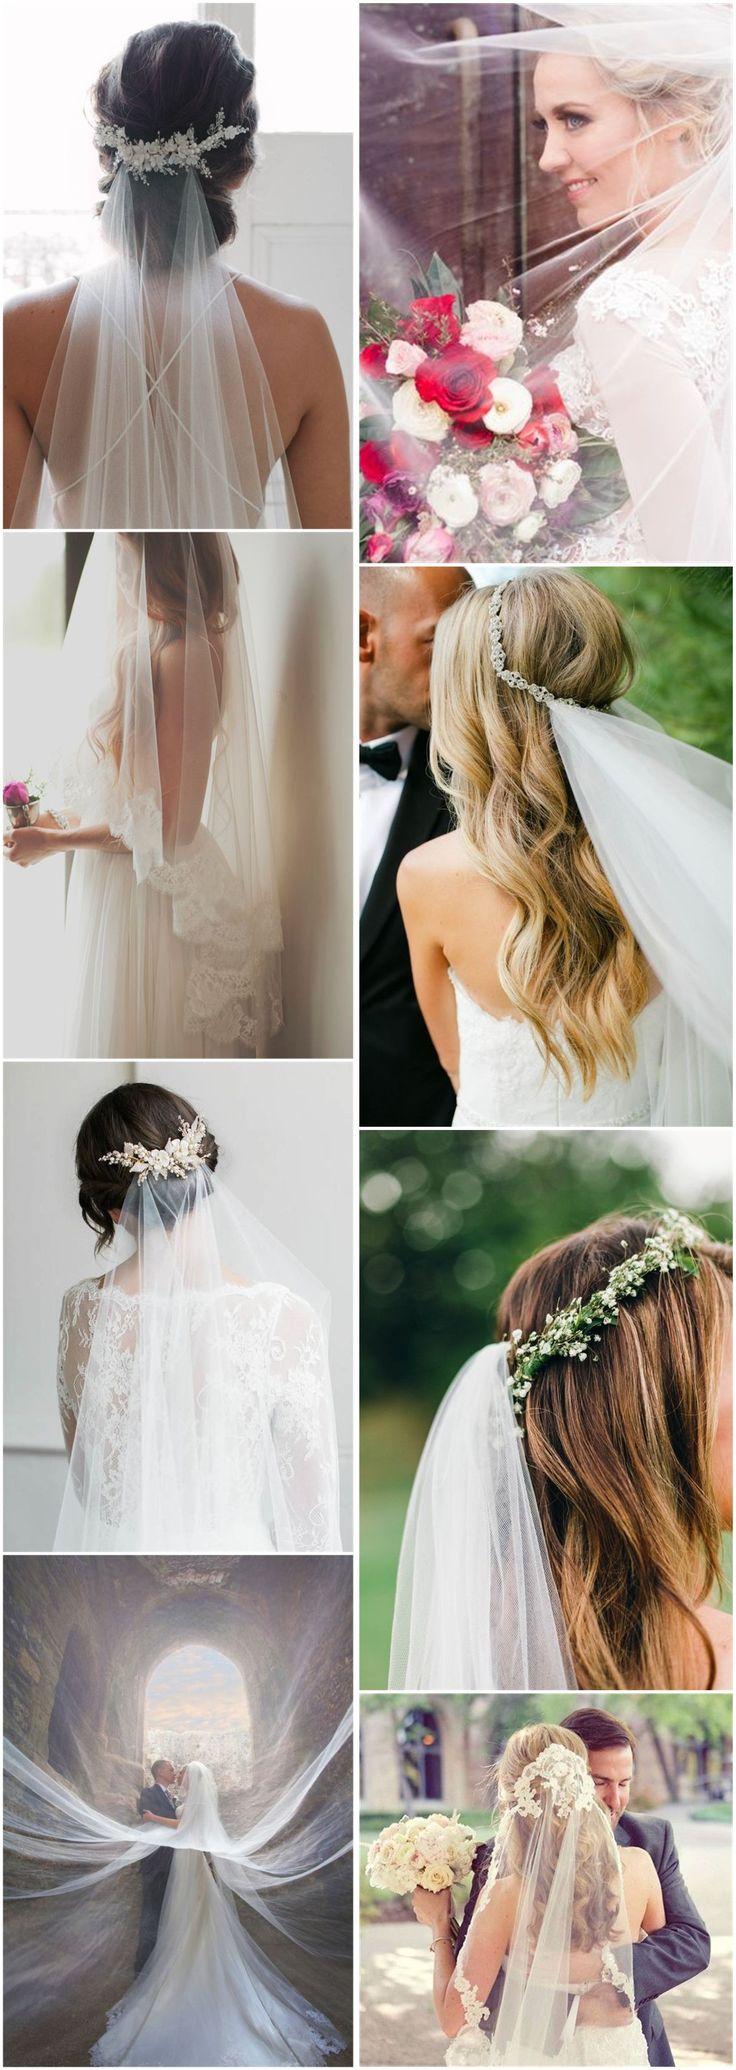 Wedding - 21 Wedding Veils You Will Fall In Love With